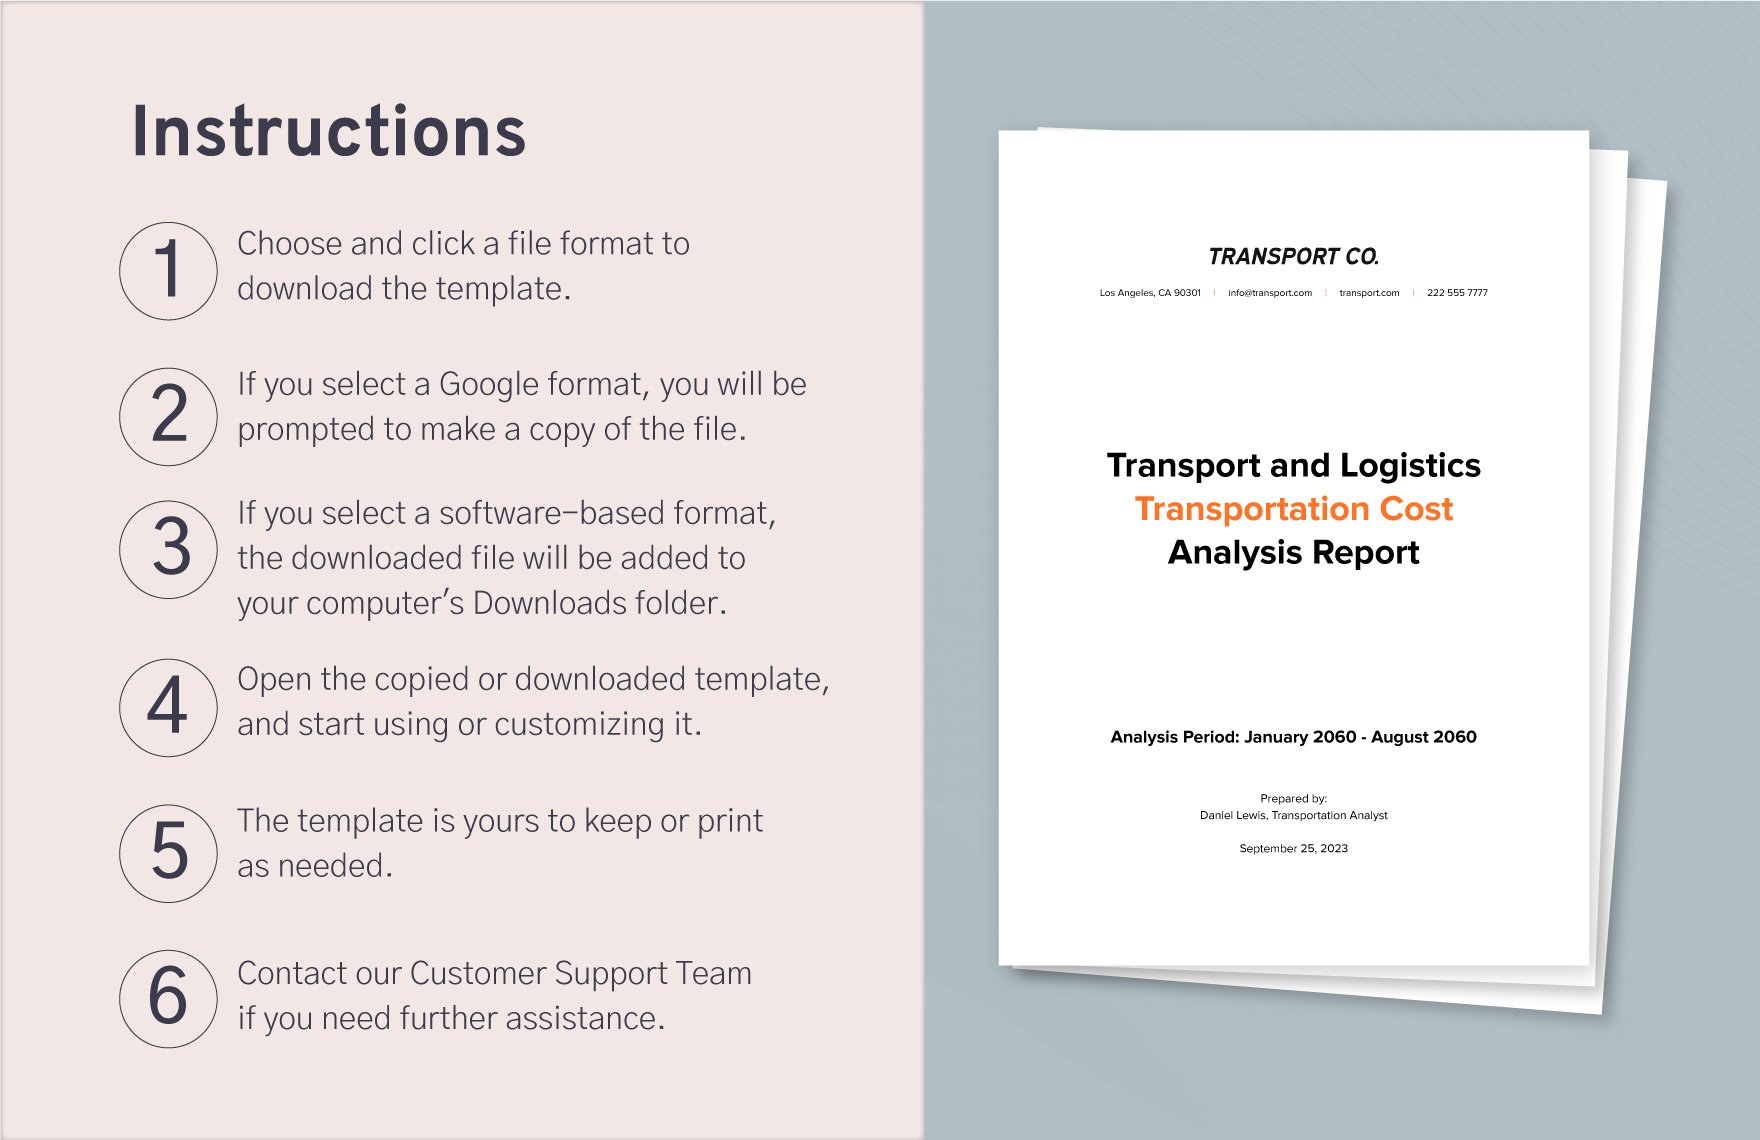 Transport and Logistics Transportation Cost Analysis Report Template